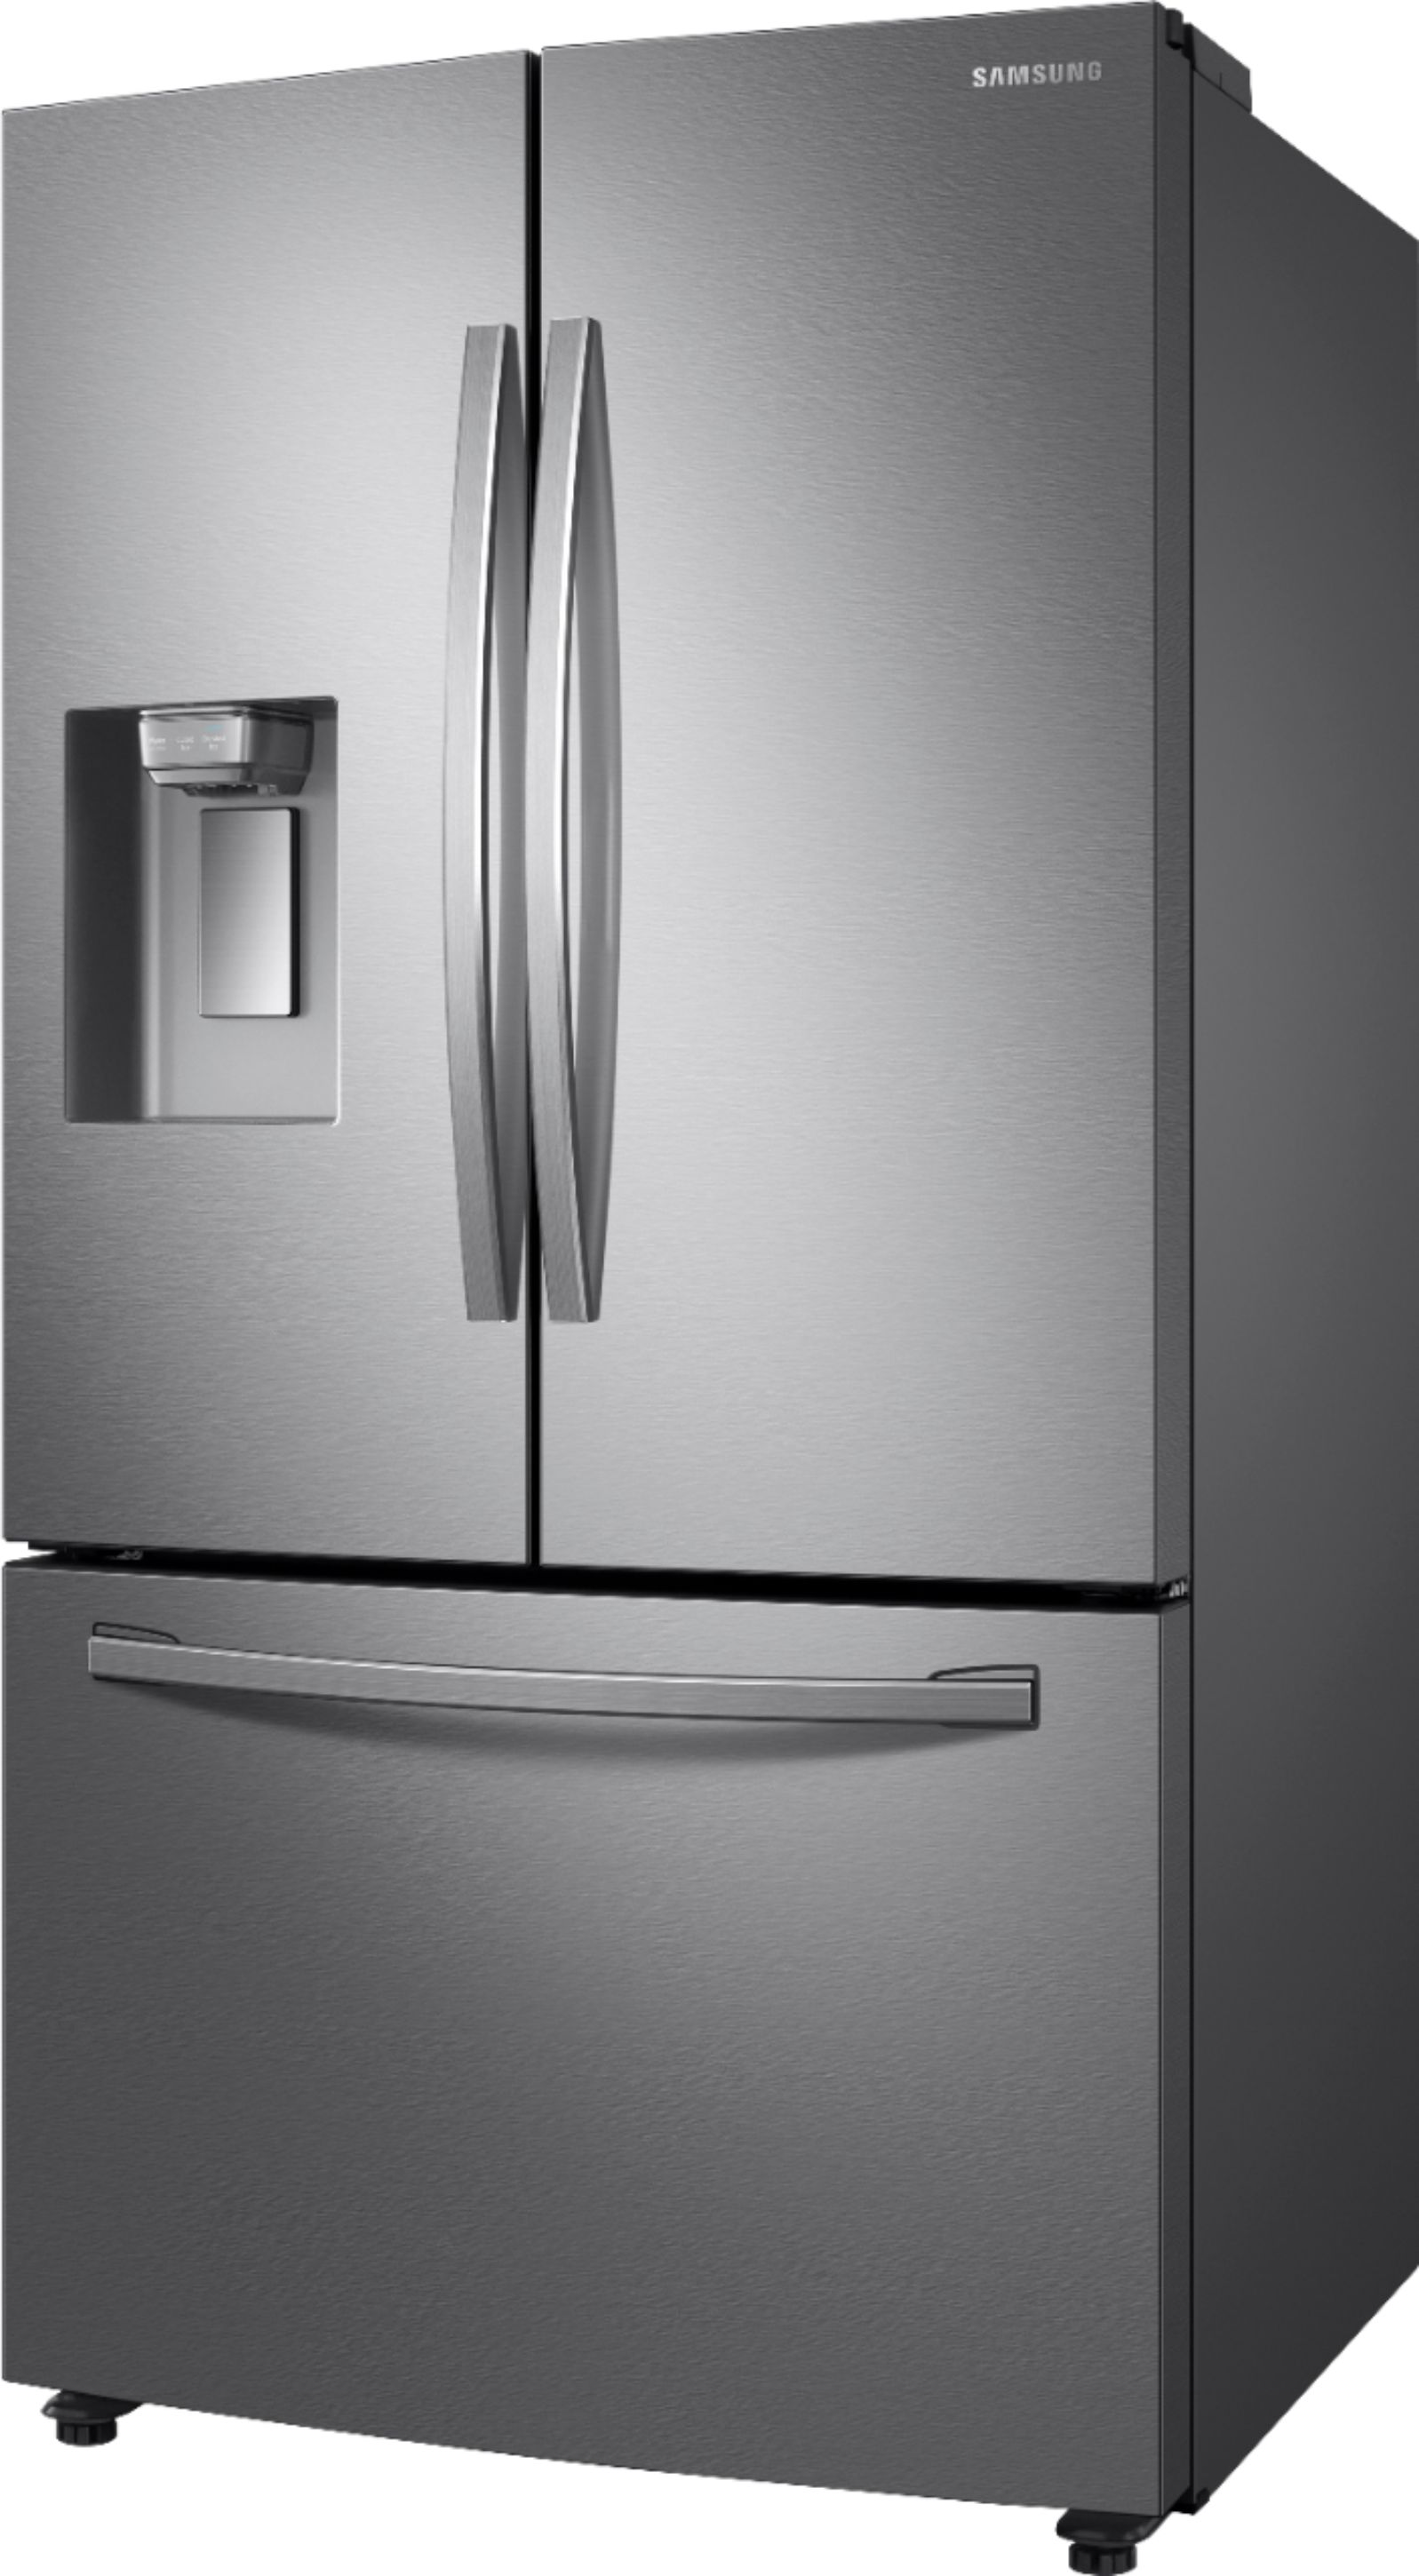 Left View: Samsung - 22.6 Cu. Ft. French Door Counter-Depth Fingerprint Resistant Refrigerator with CoolSelect Pantry - Stainless steel